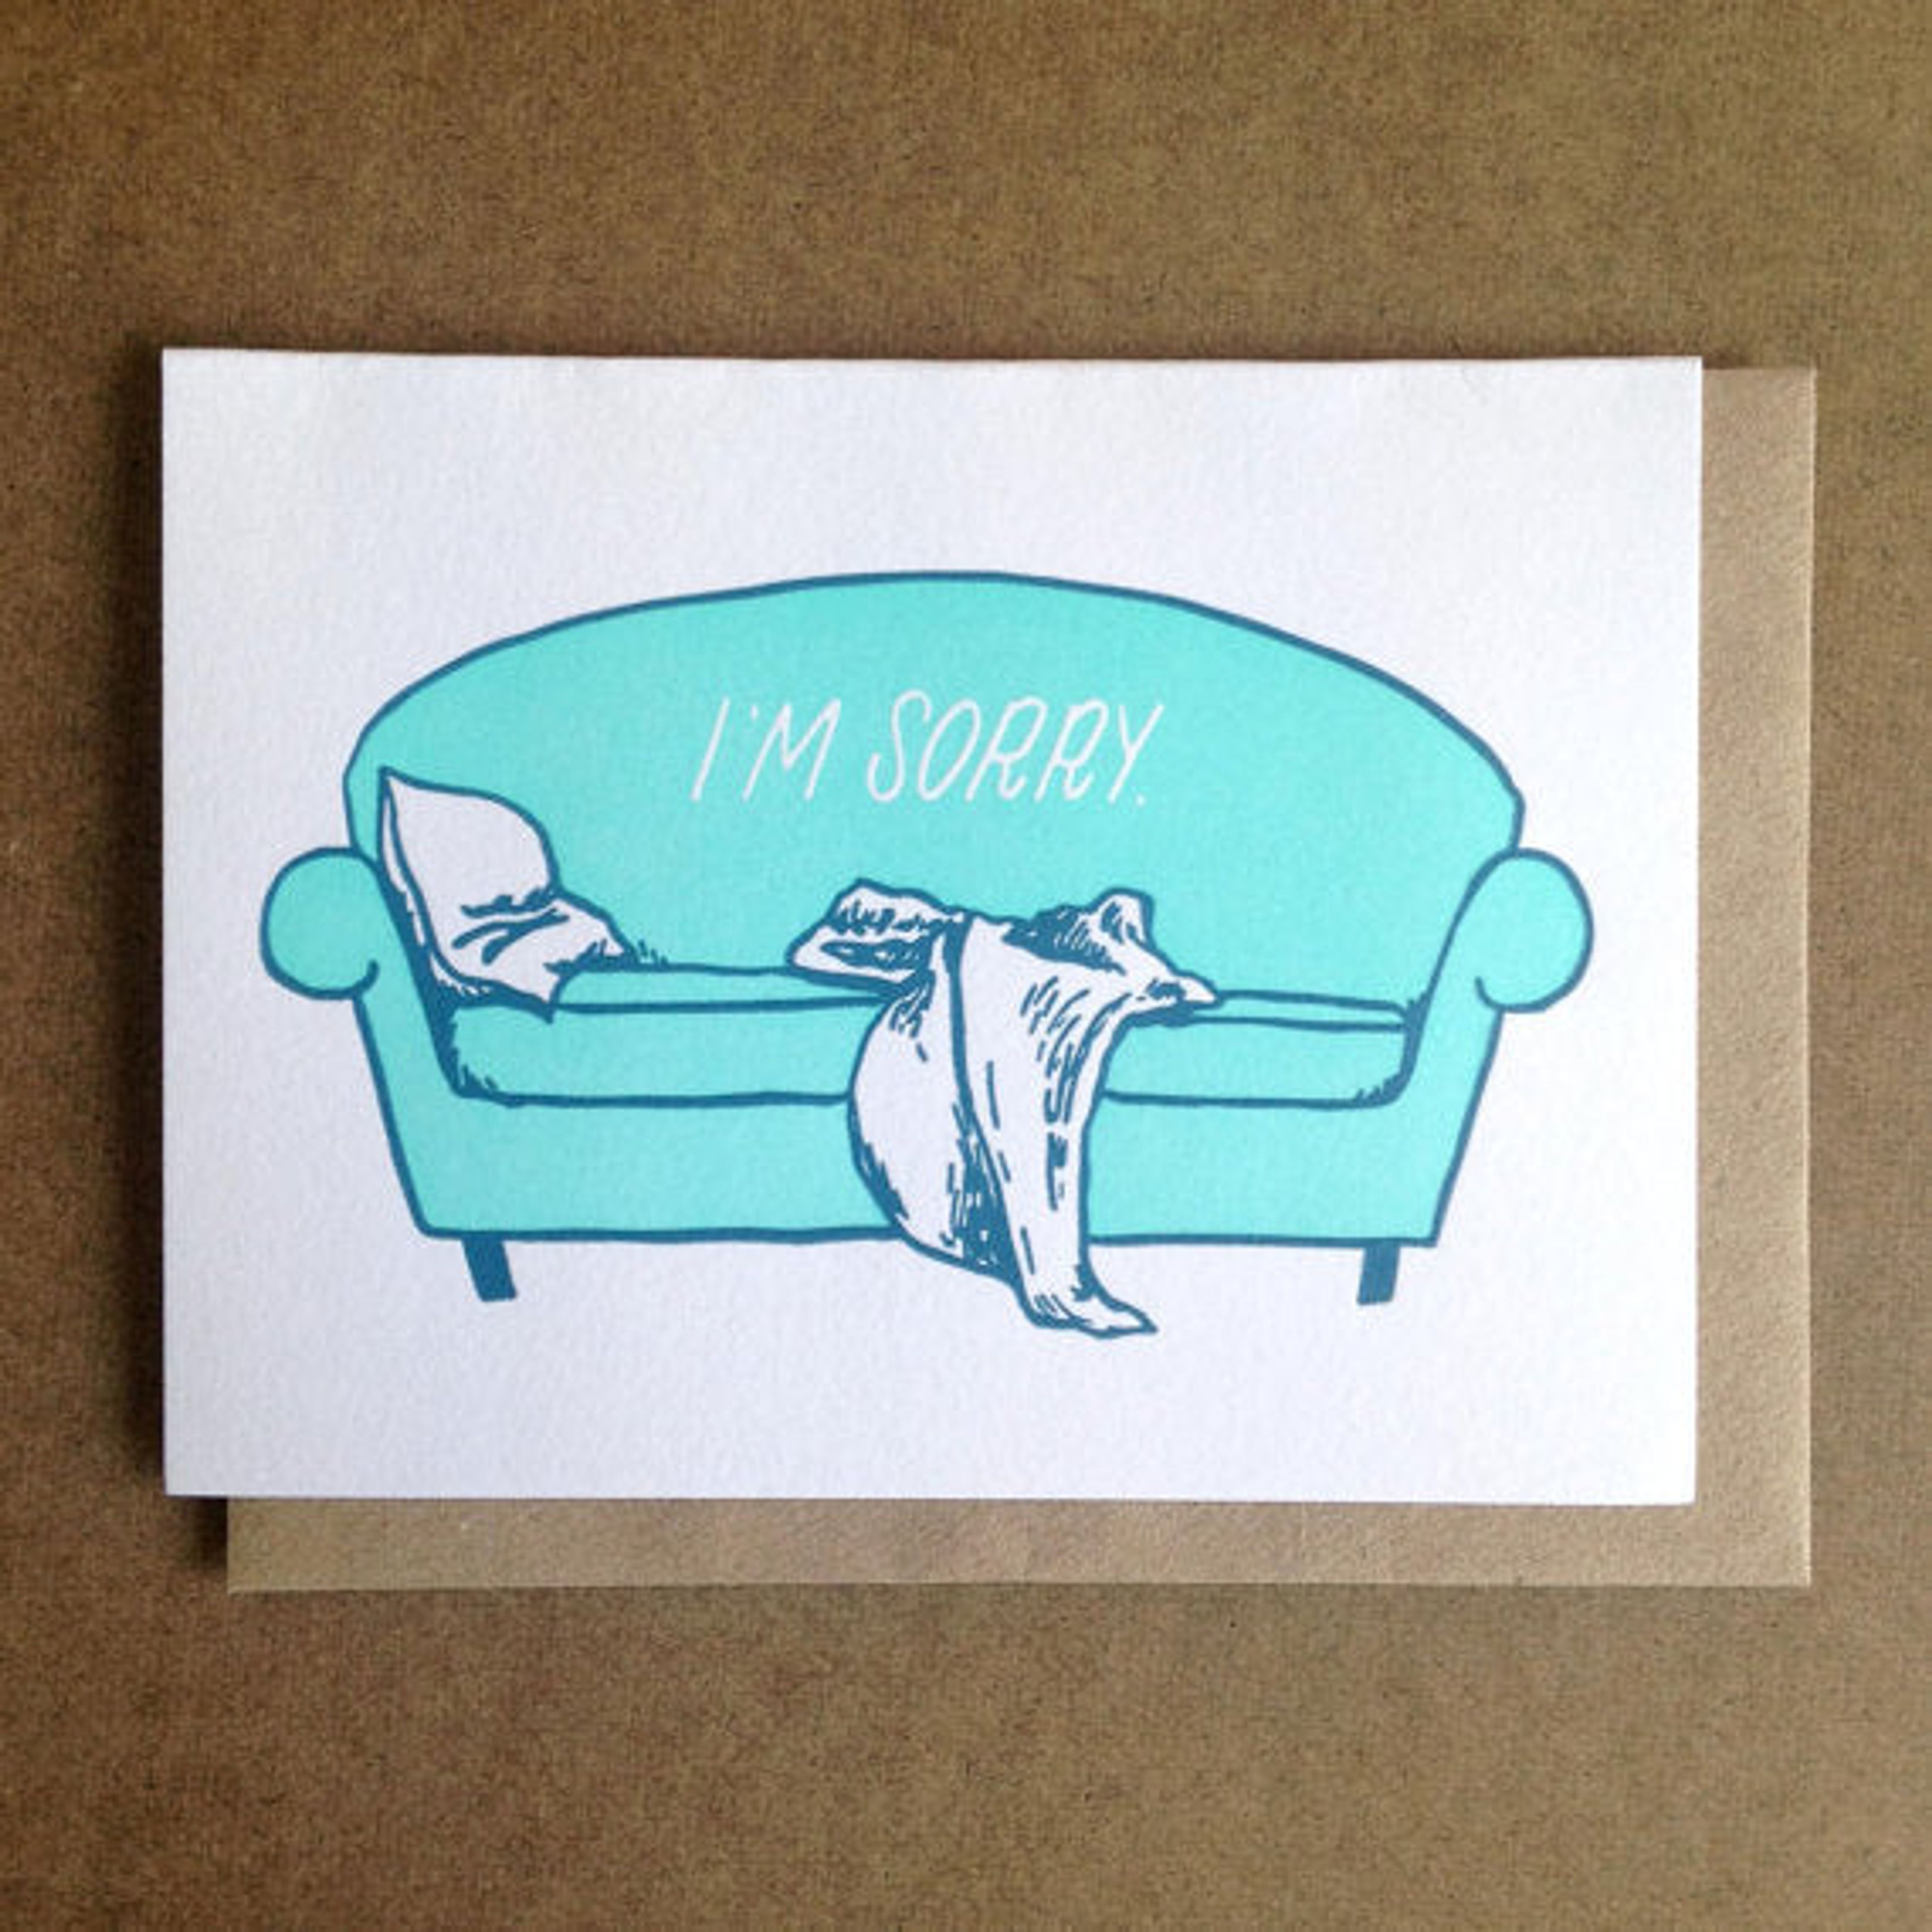 The "I'm Sorry" Couch Greeting Card